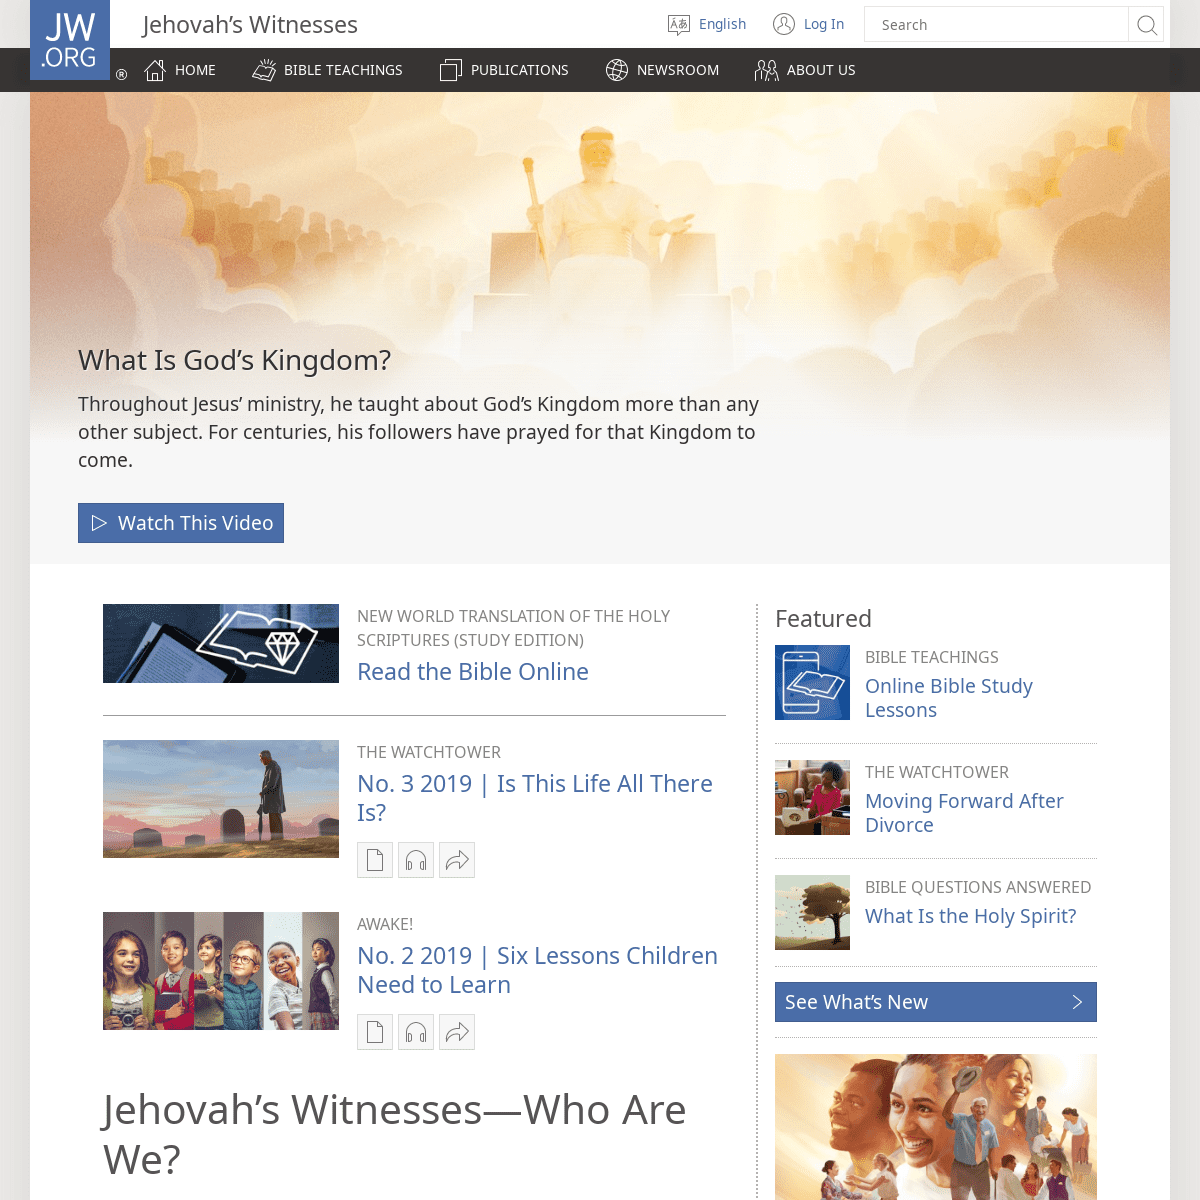 Jehovah’s Witnesses—Official Website: jw.org